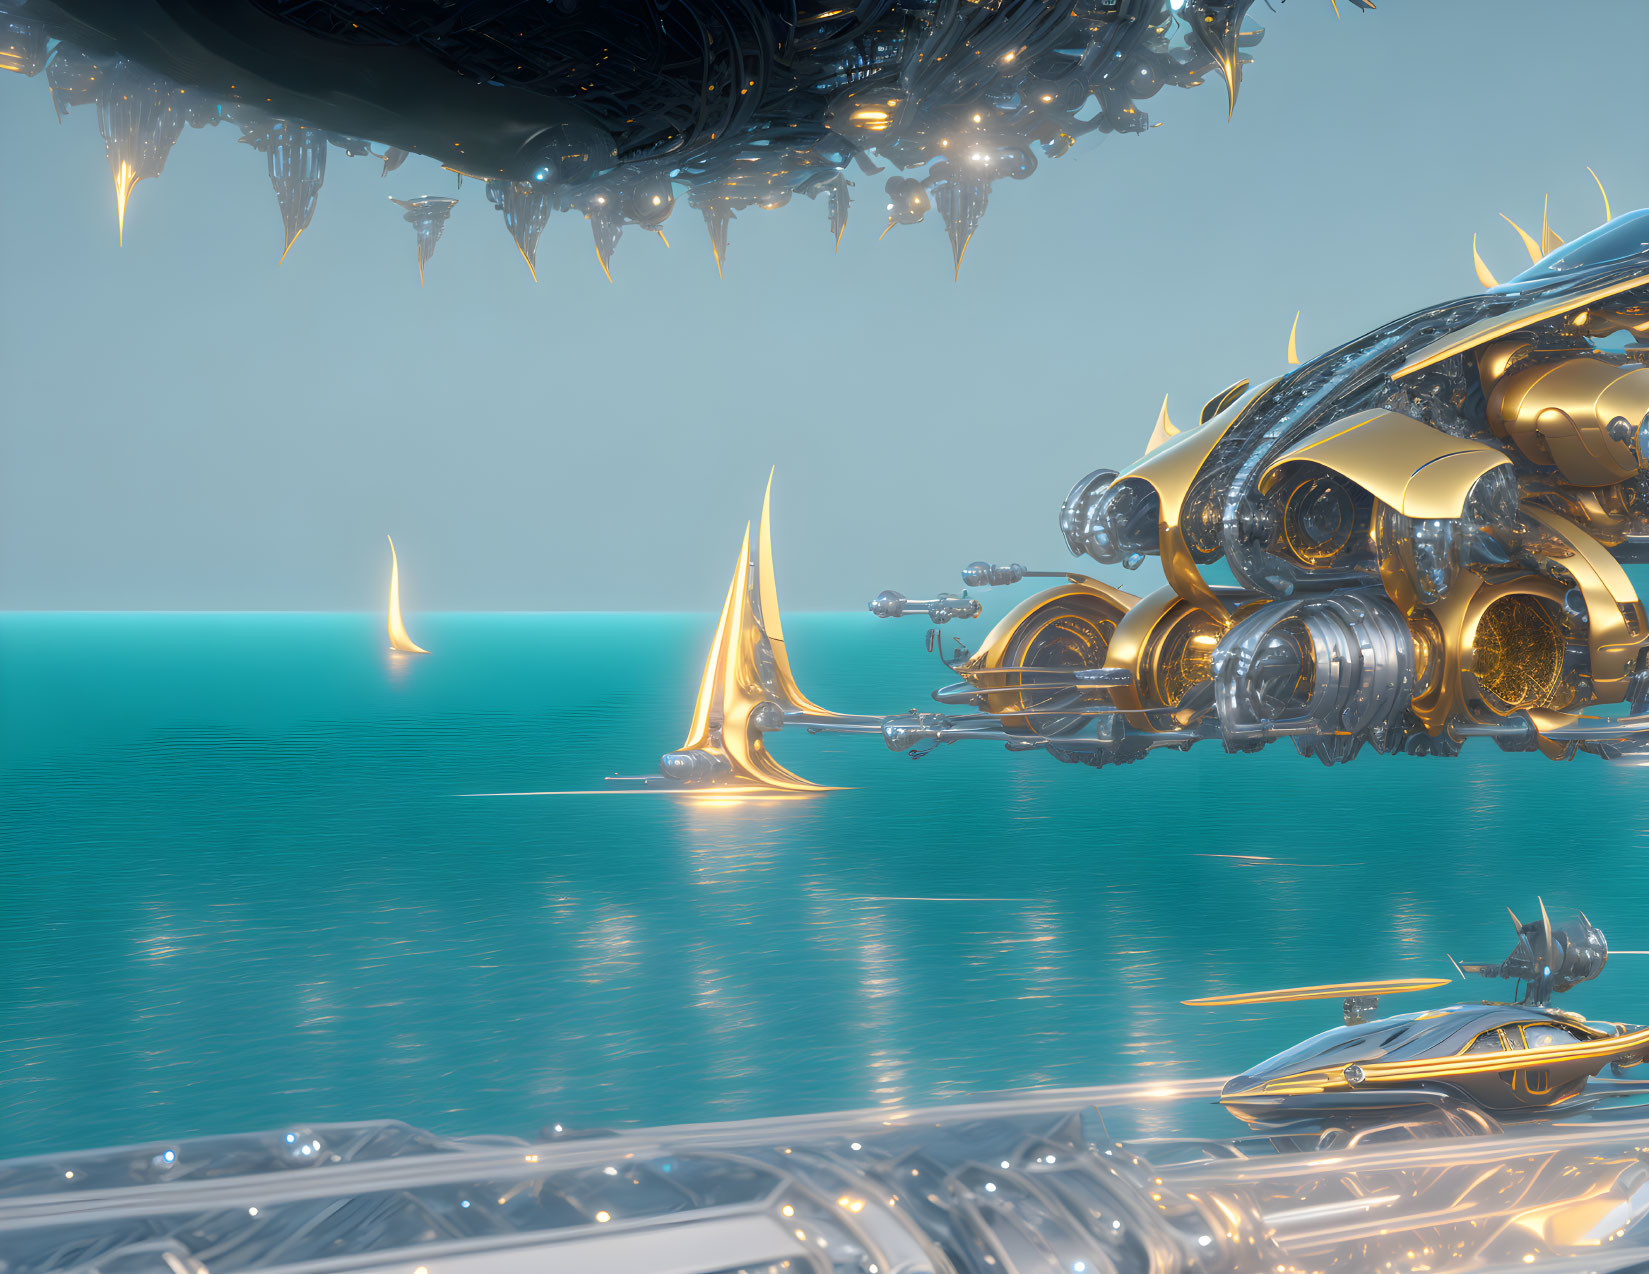 Golden futuristic structures over teal ocean with sail-like elements